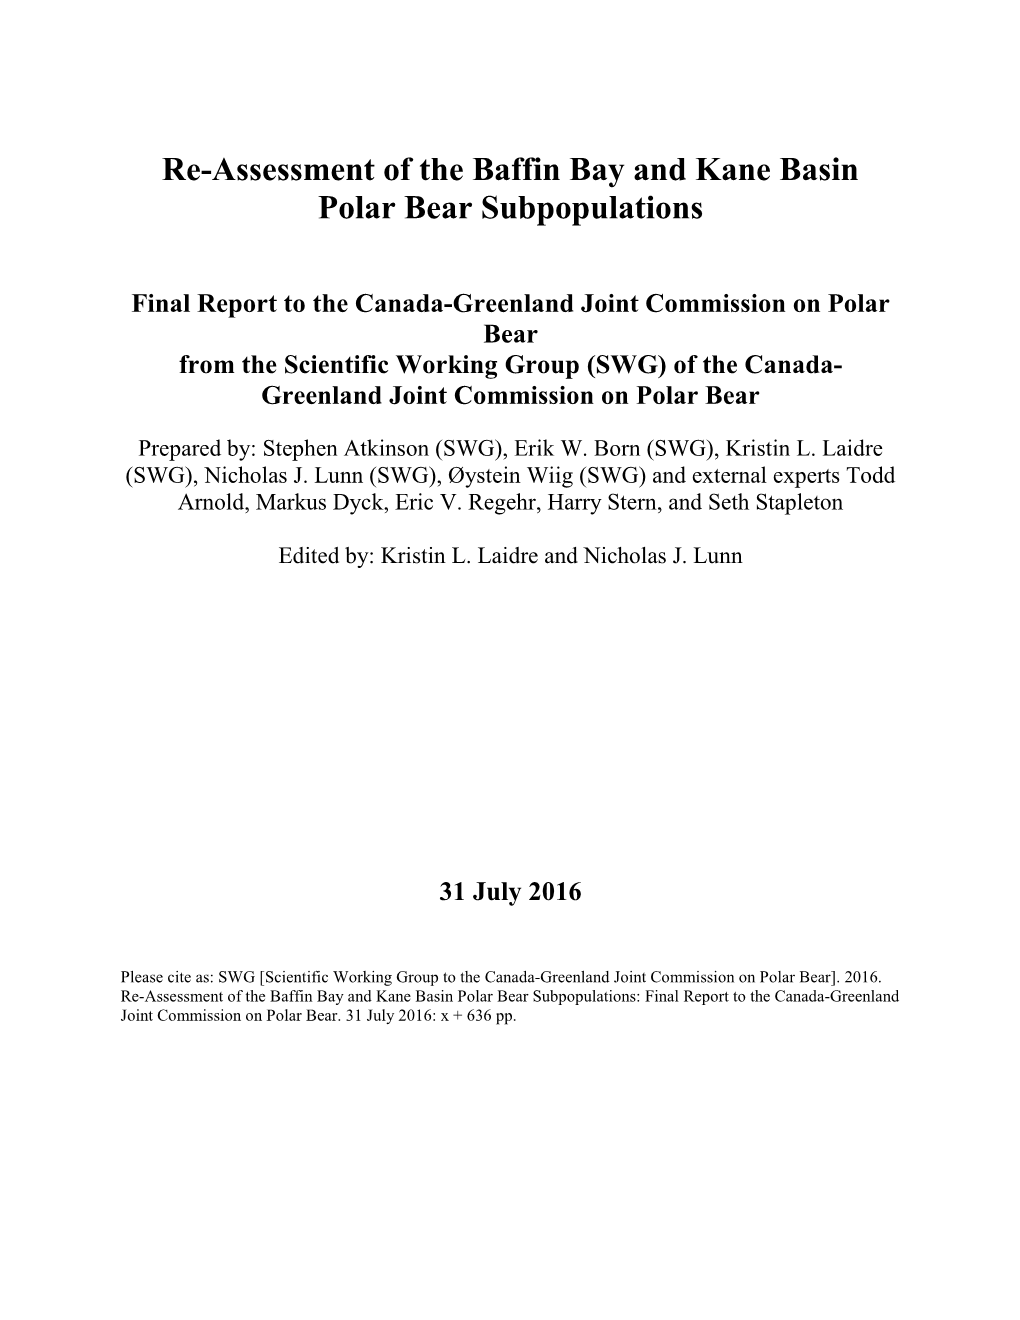 Re-Assessment of the Baffin Bay and Kane Basin Polar Bear Subpopulations